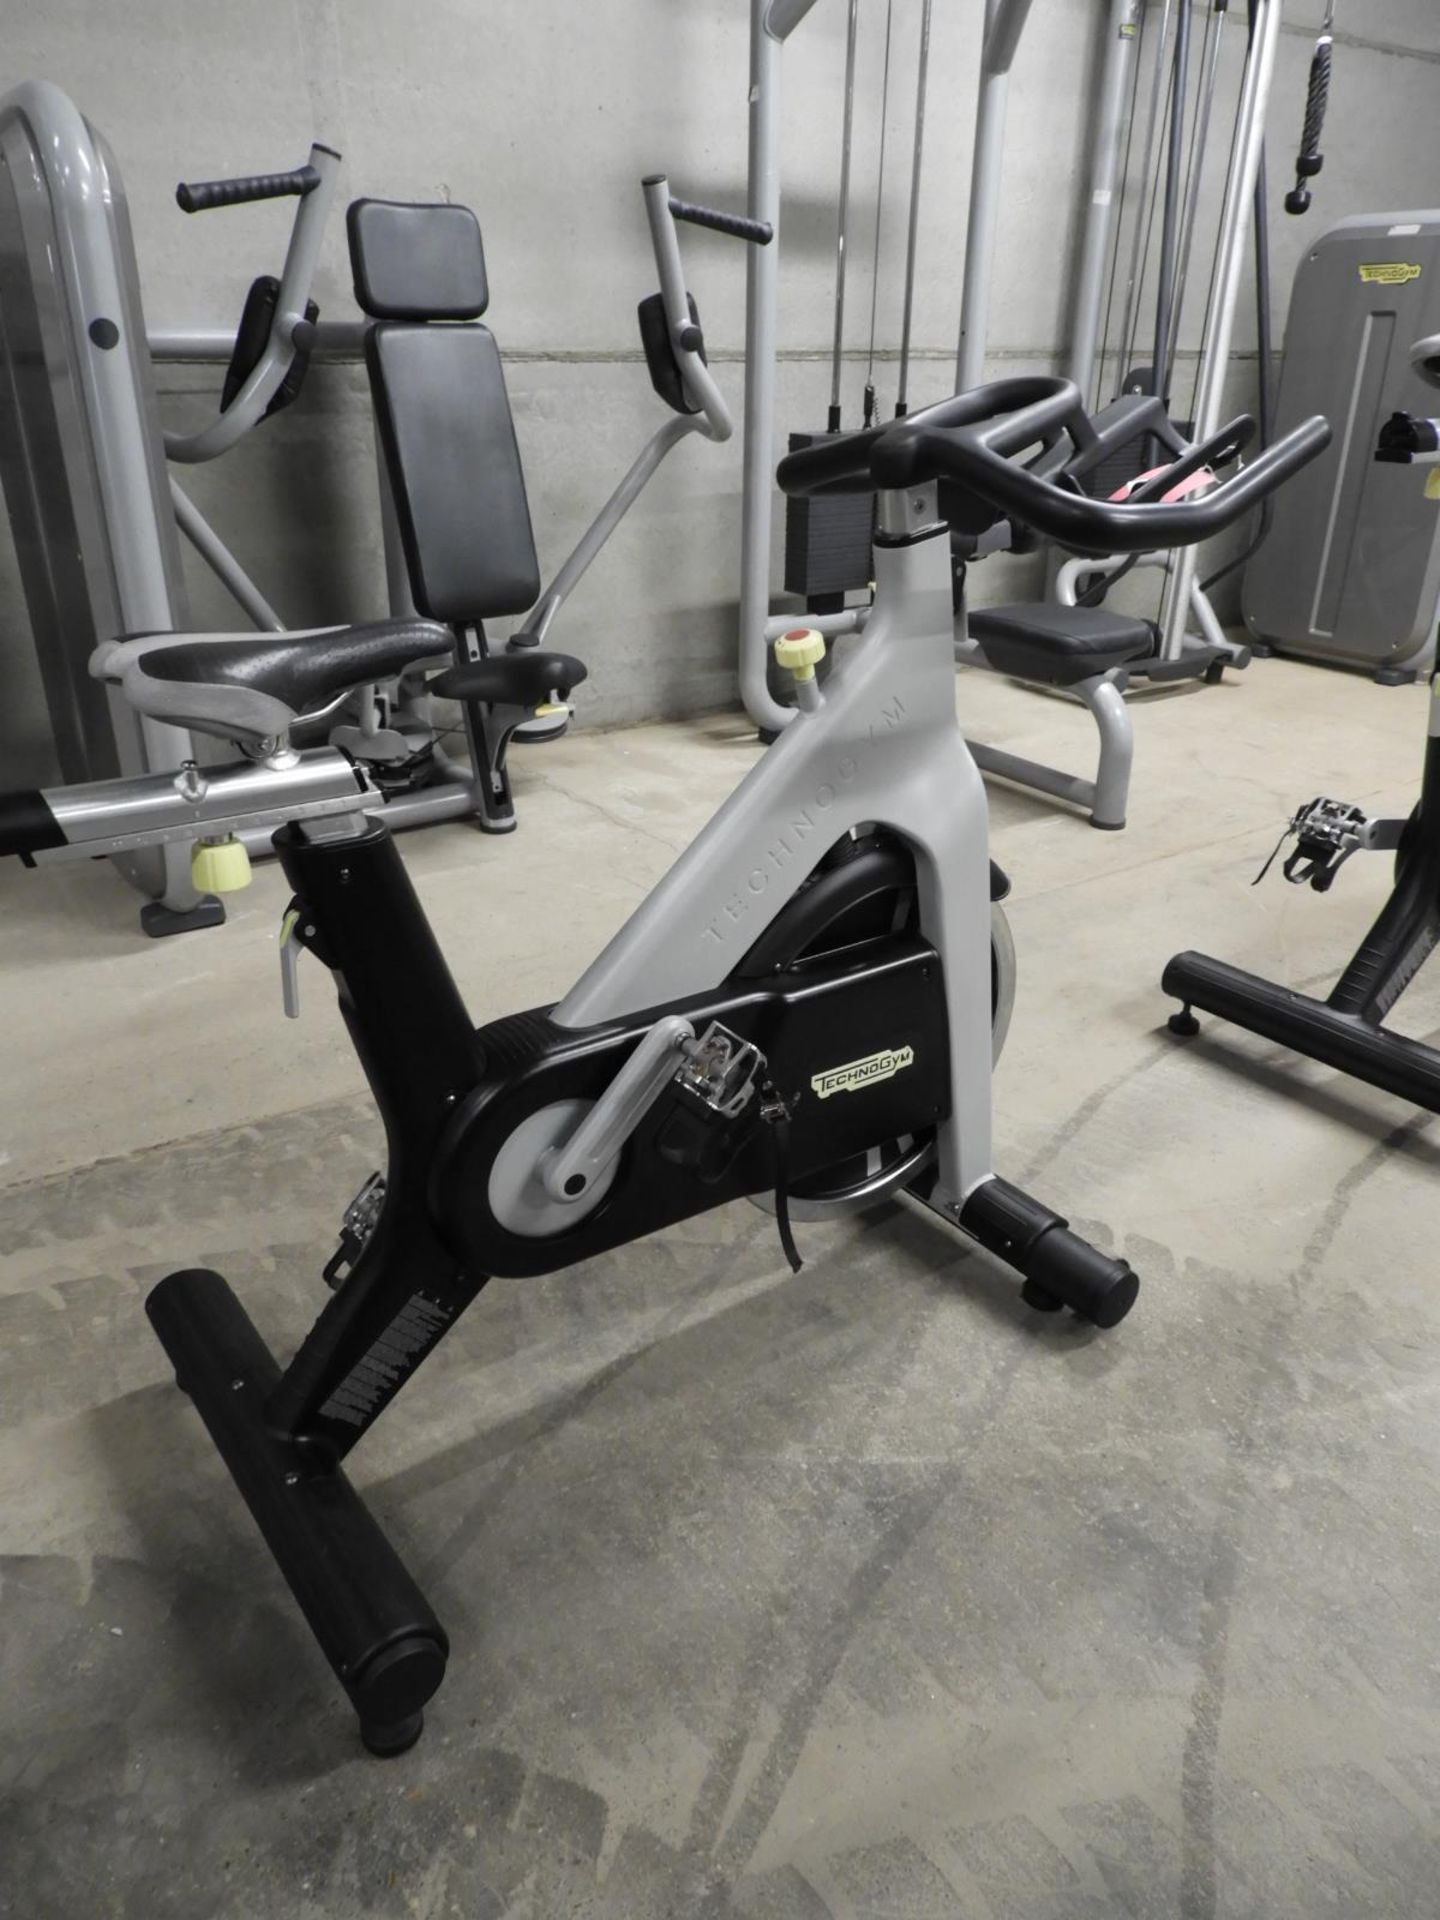 *Technogym Spin Studio Spin Cycle